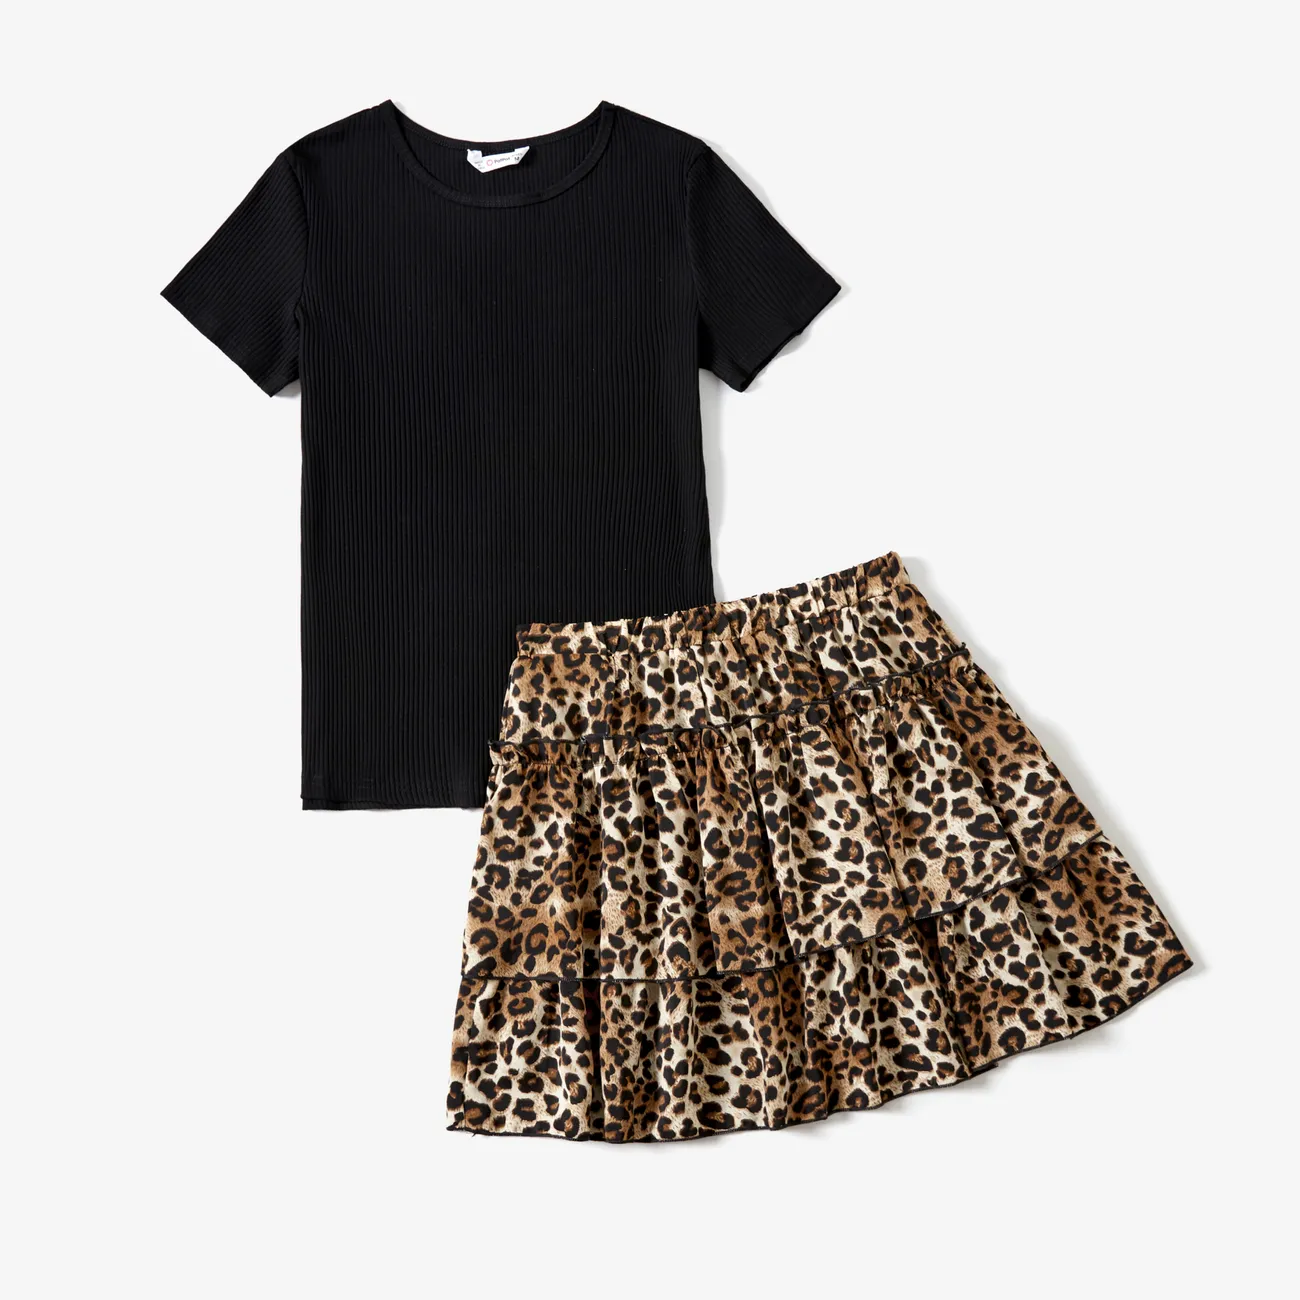 Mommy and Me Rib Black Top and Leopard Print Tiered Pleated Skirt Sets Black big image 1